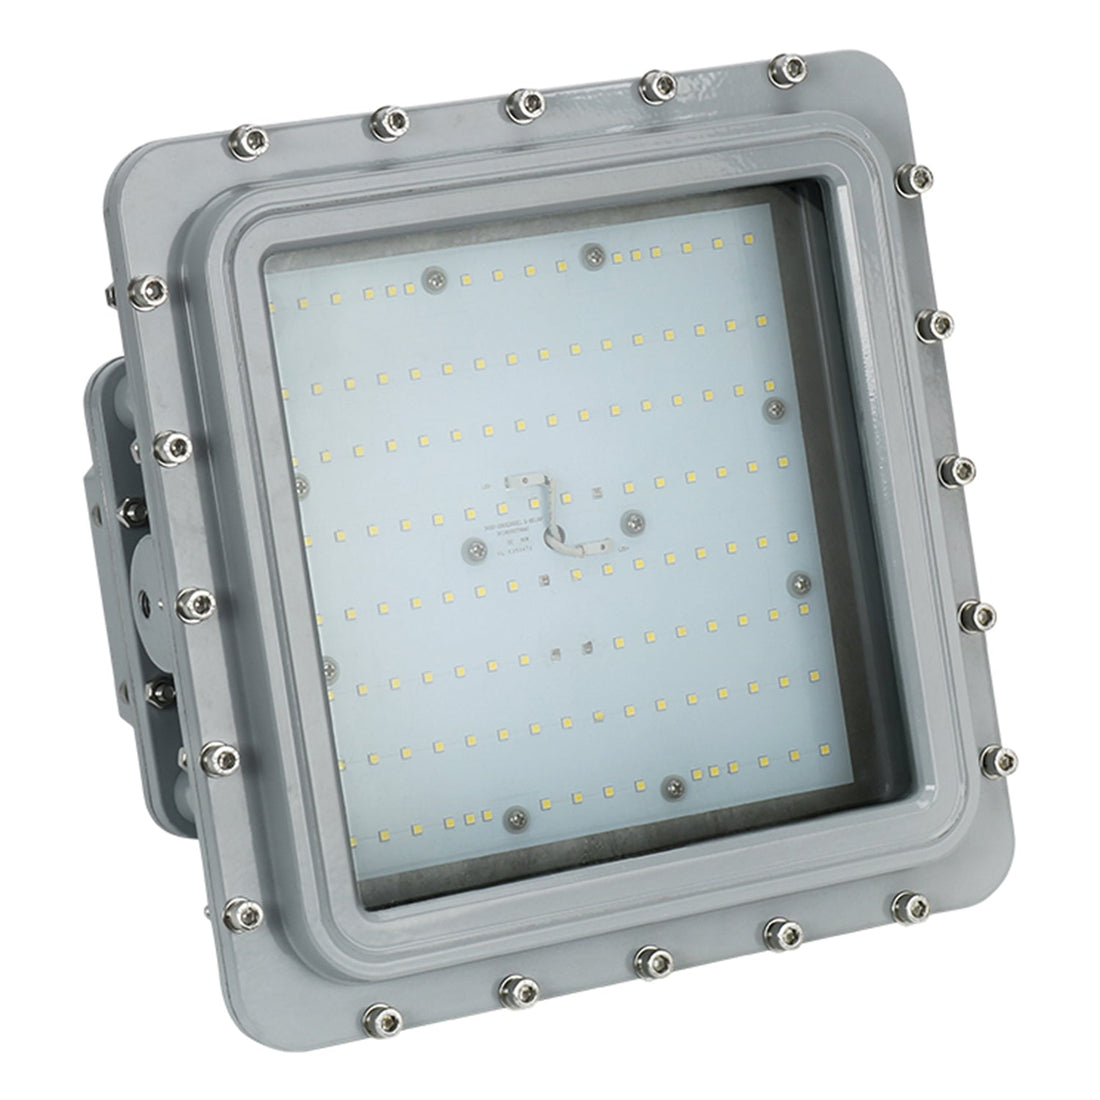 D Series 80W Dimmable LED Explosion Proof Flood Light: Efficient and Adjustable Lighting Solution for Hazardous Locations with 10800LM and IP66 Protection, Ideal for Industrial Environments